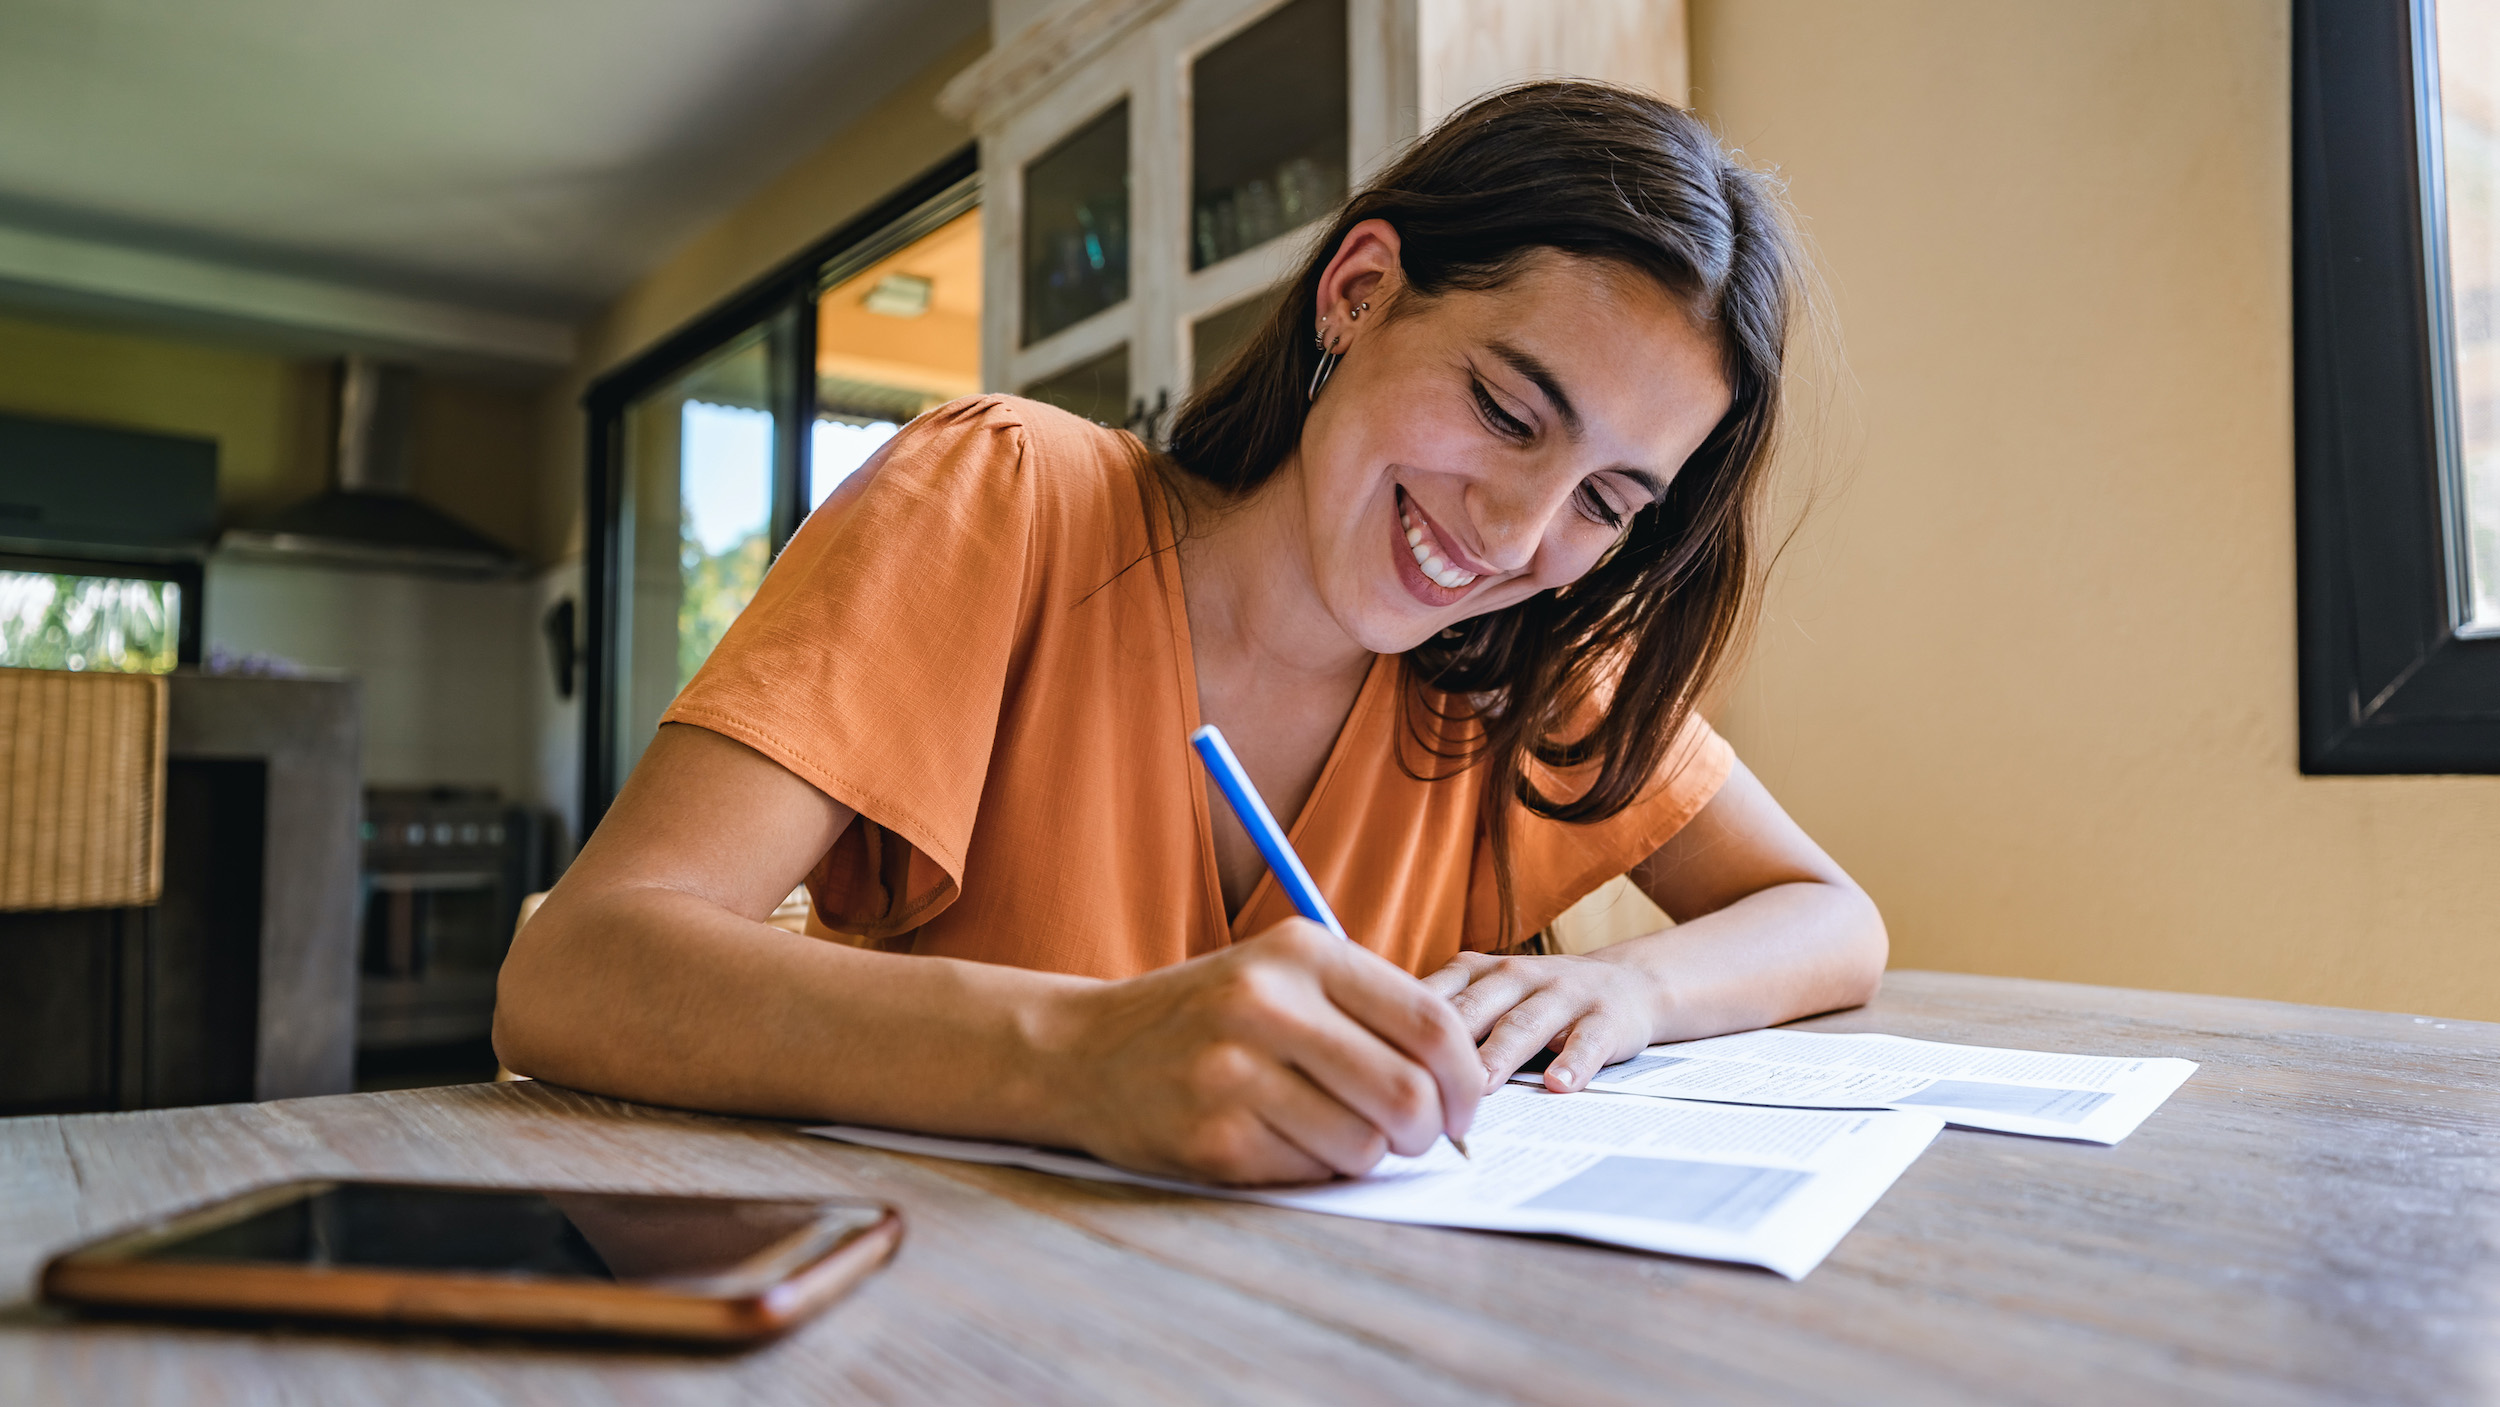 A smiling young woman in an orange shirt sits at a desk and signs papers.